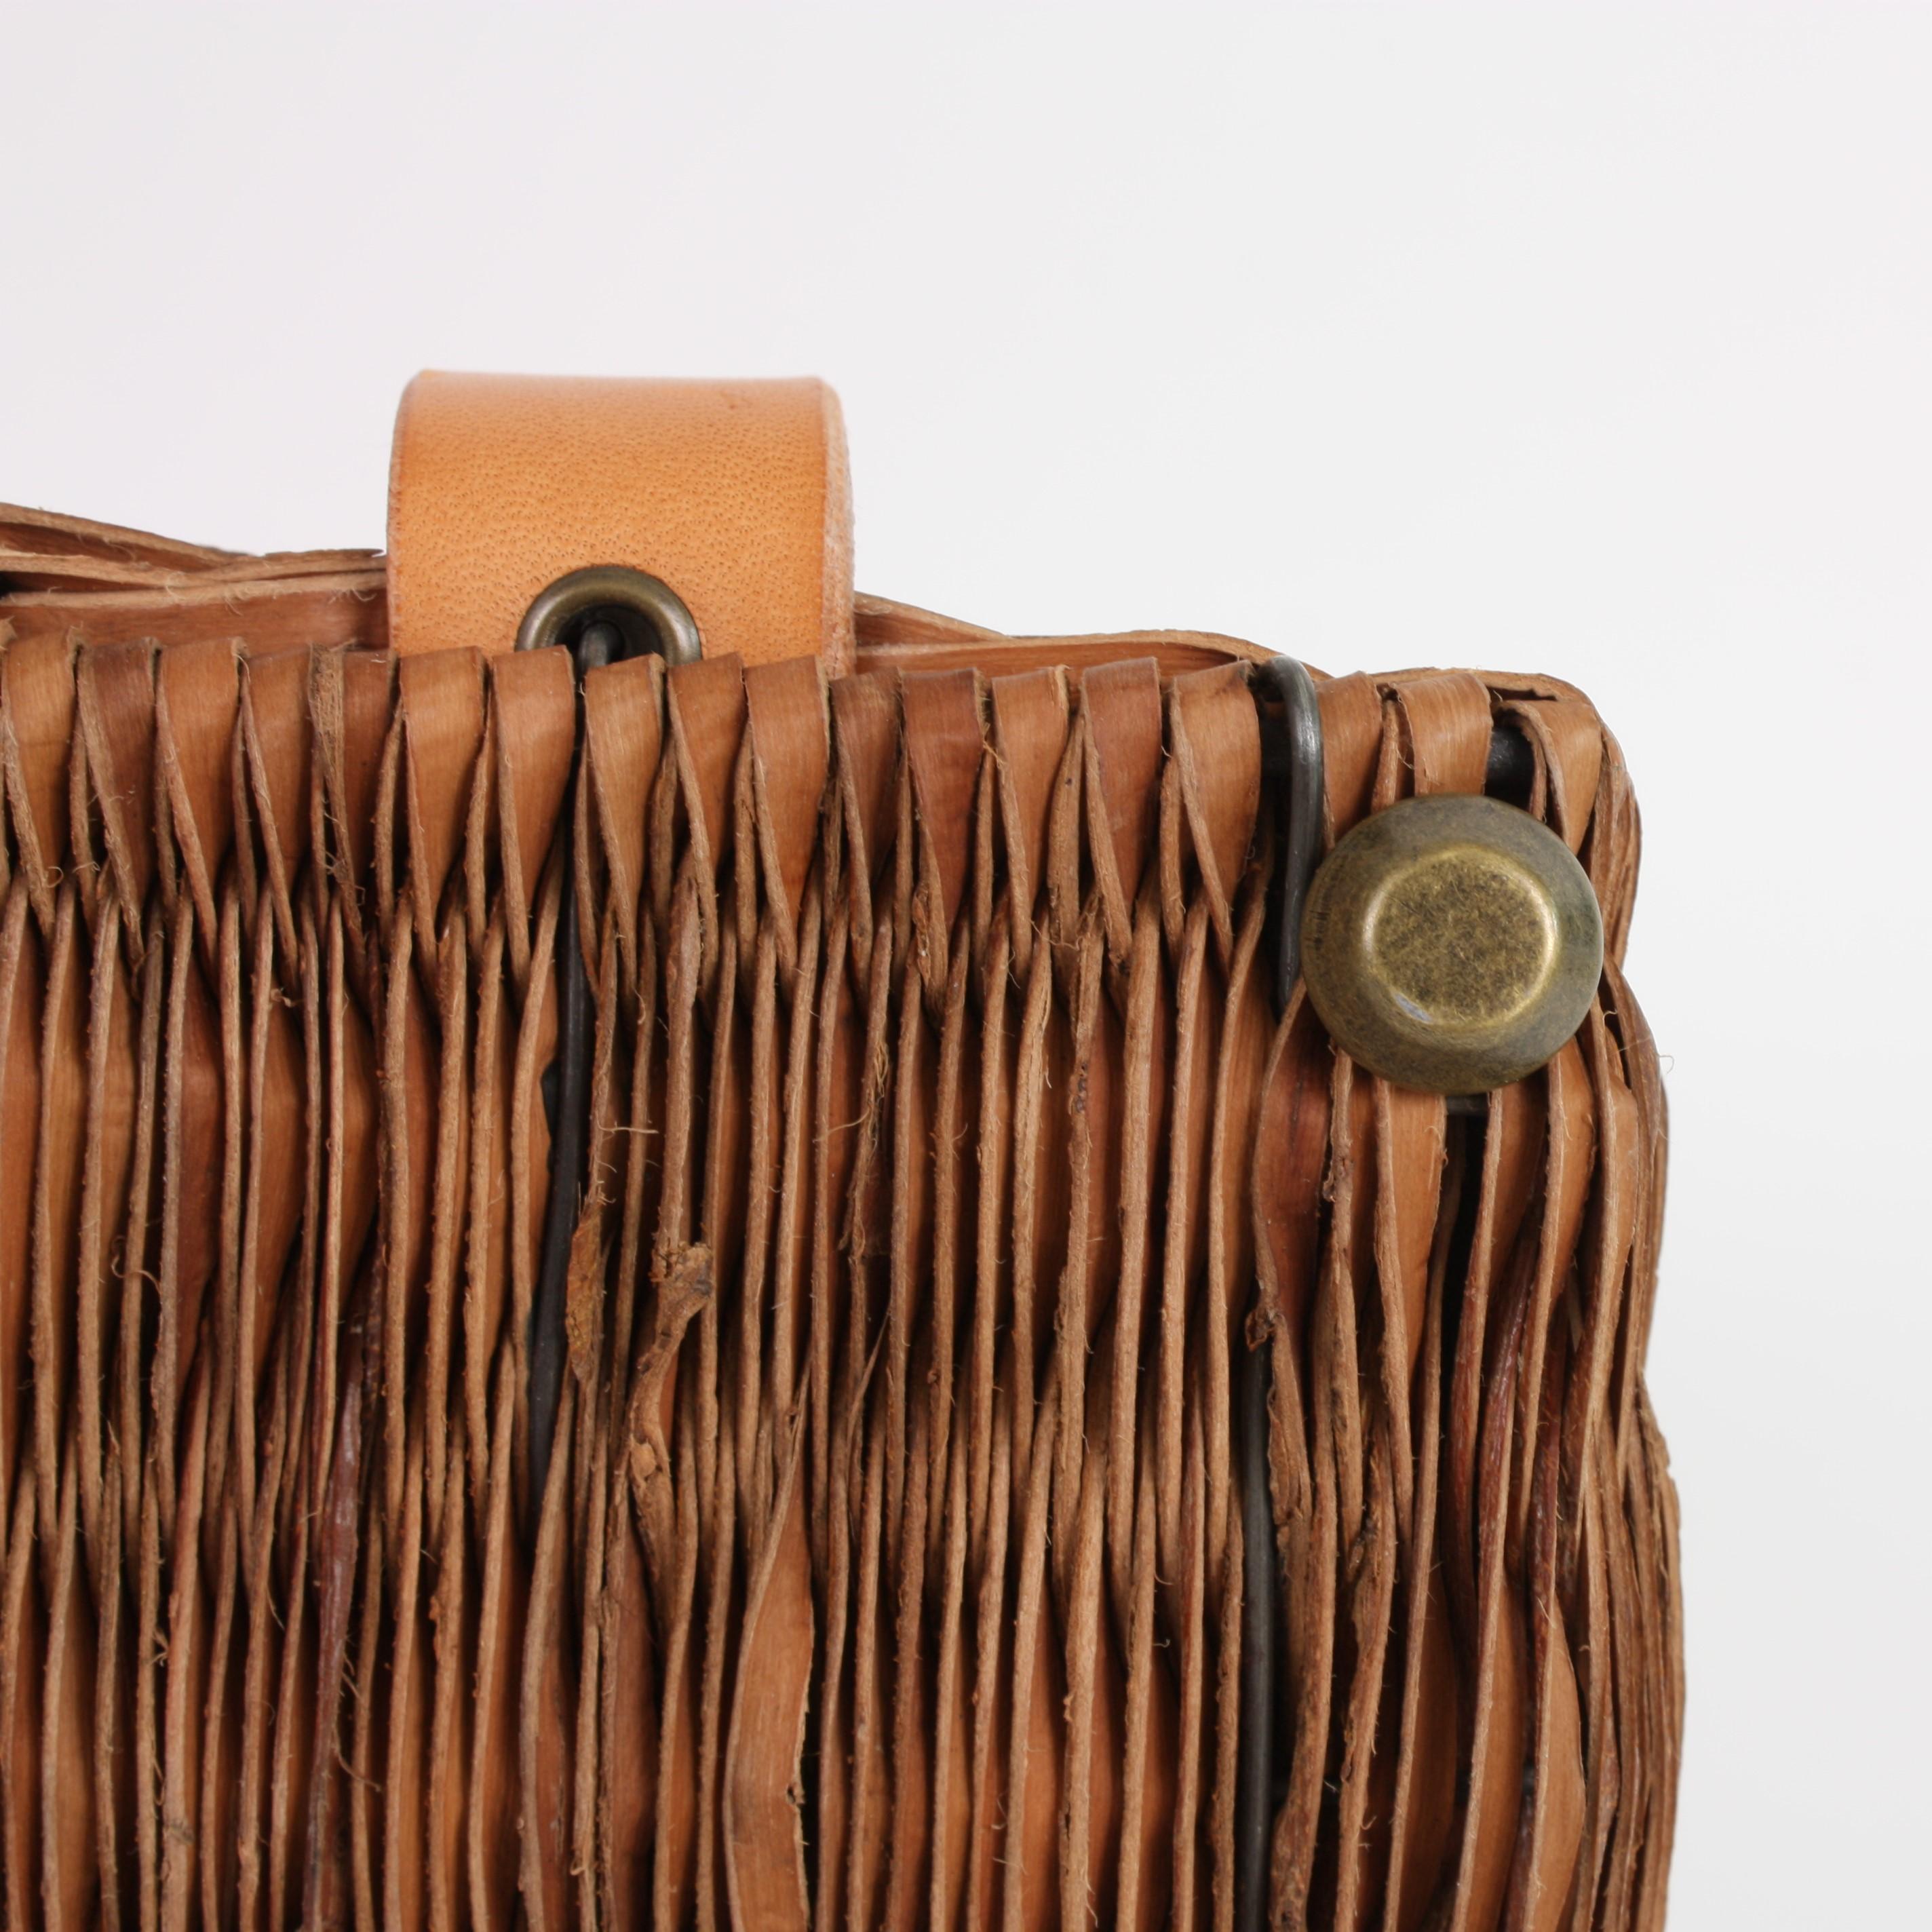 Bespoke Leather and Willow Bark Handbag - L’Olympien For Sale 2